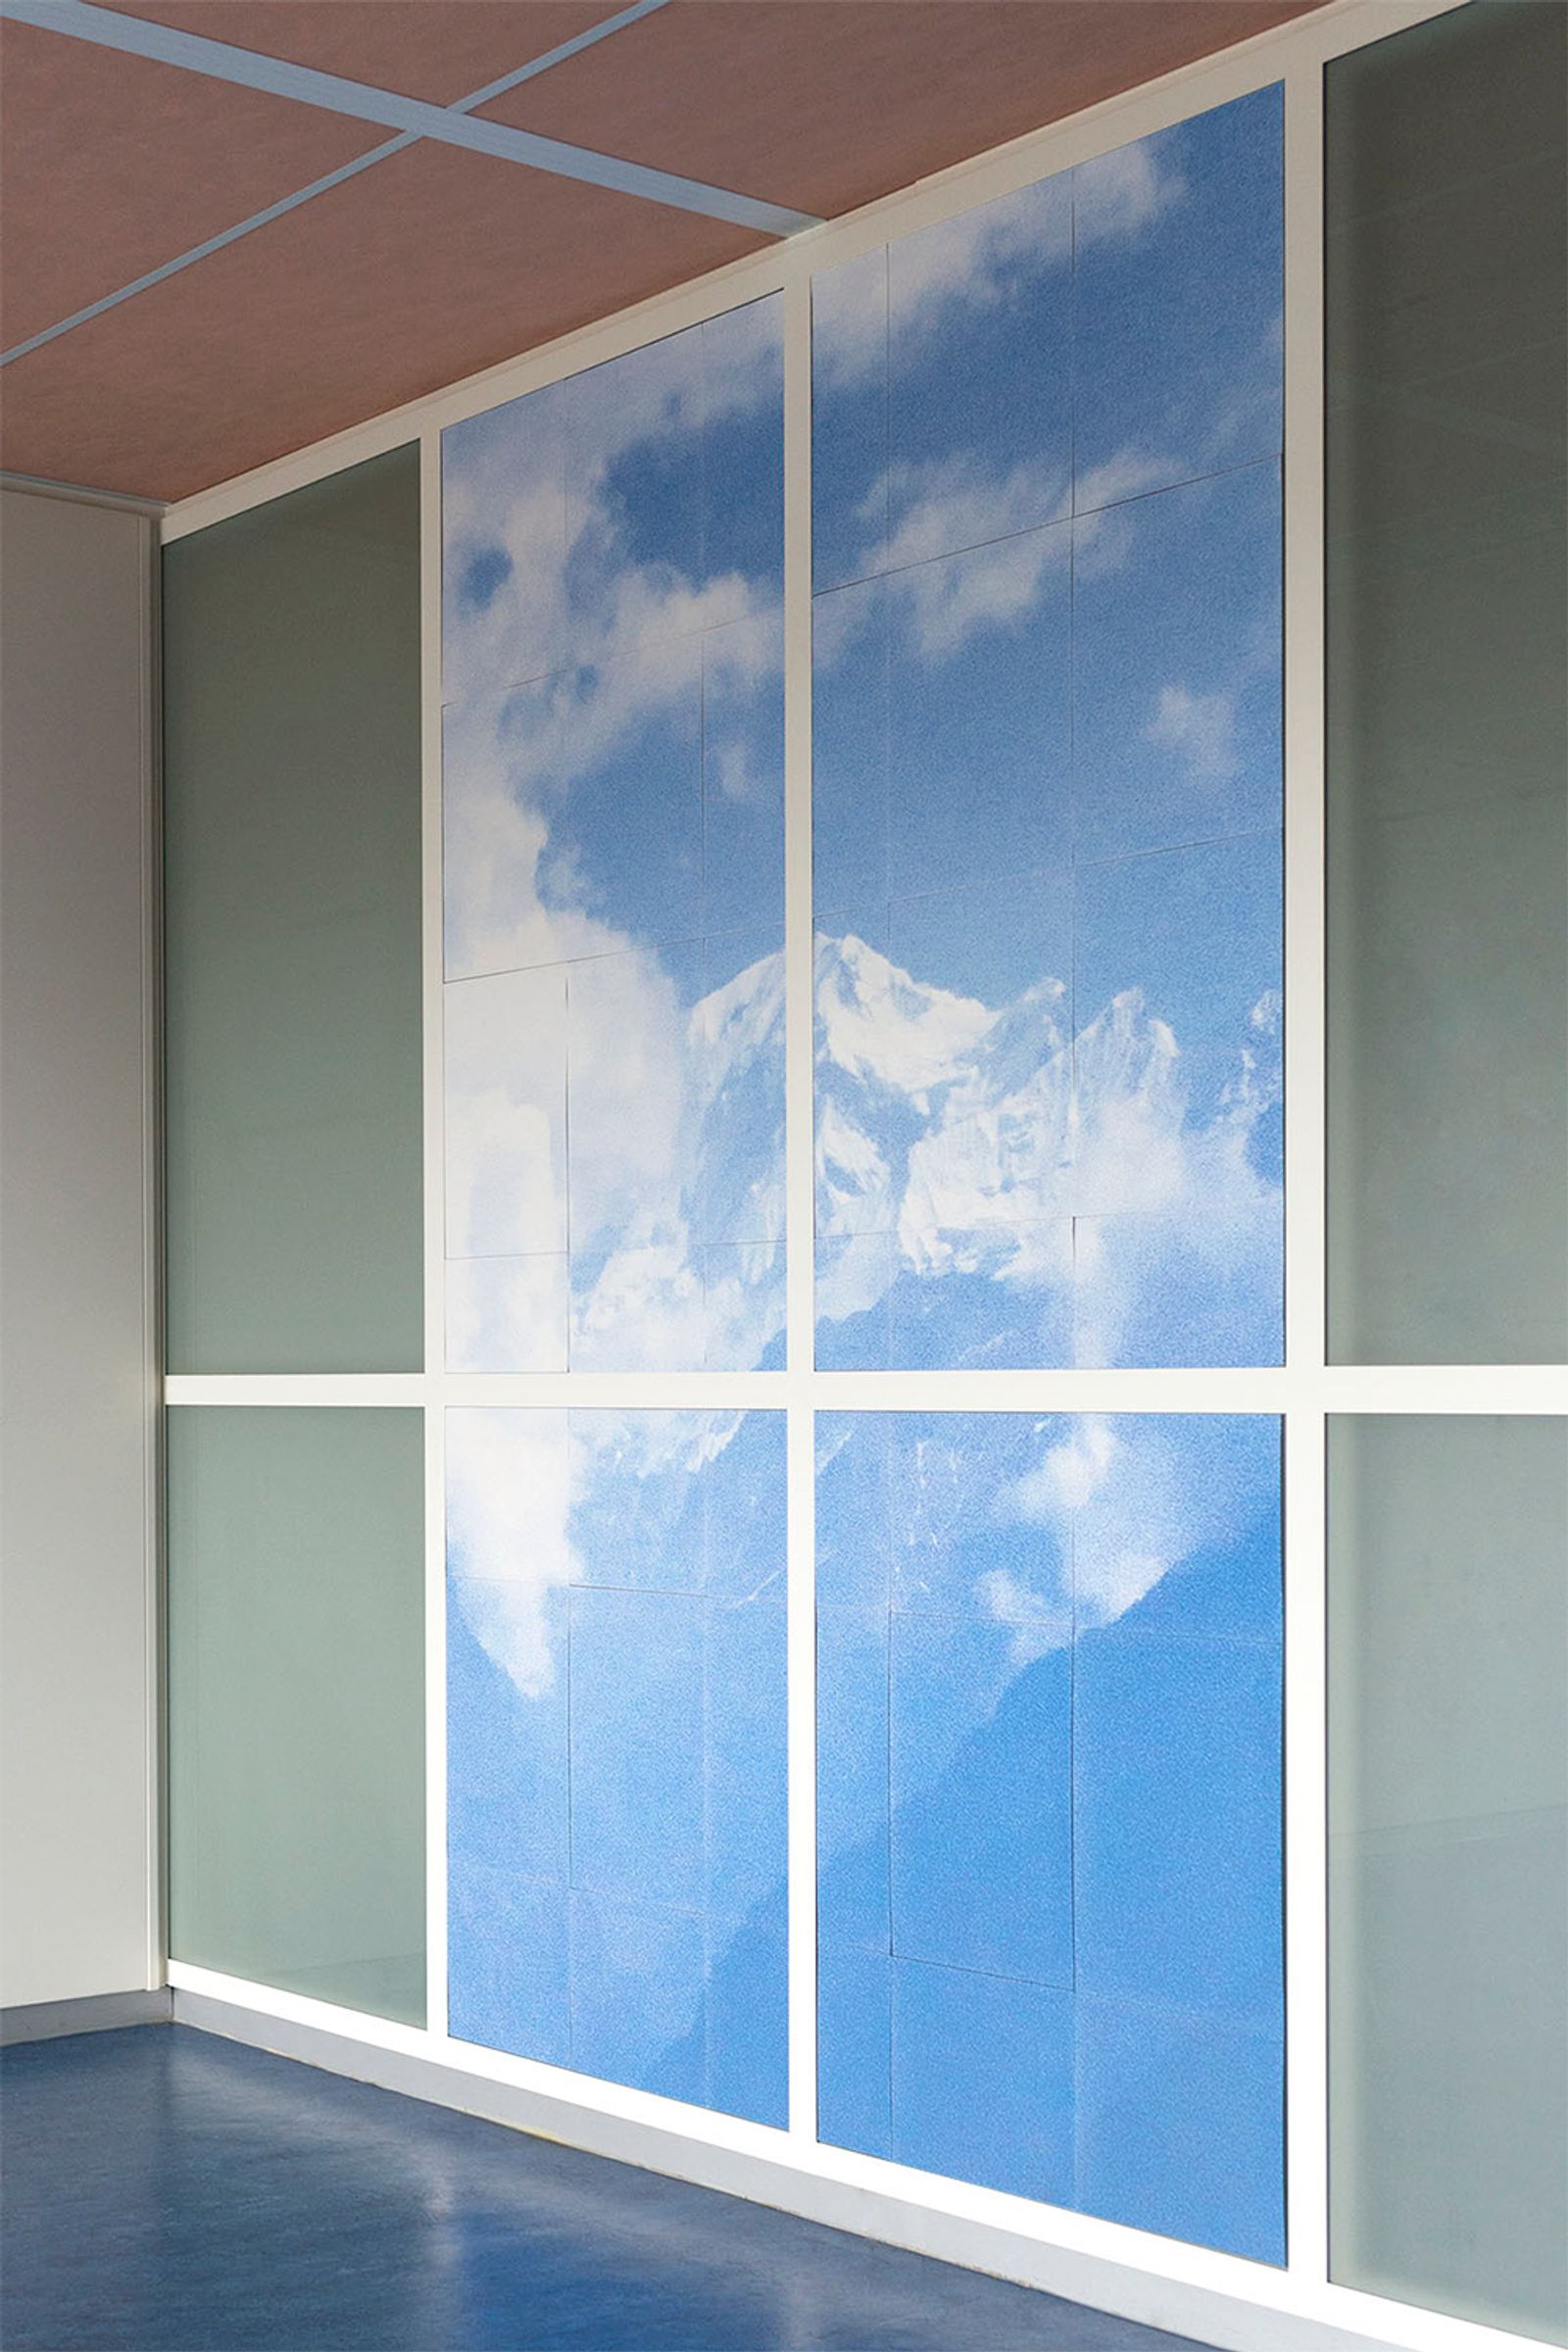 © Eva Kreuger - Atelier (2019) - Documented spatial installation. Constructed with images of the Himalayan mountains.